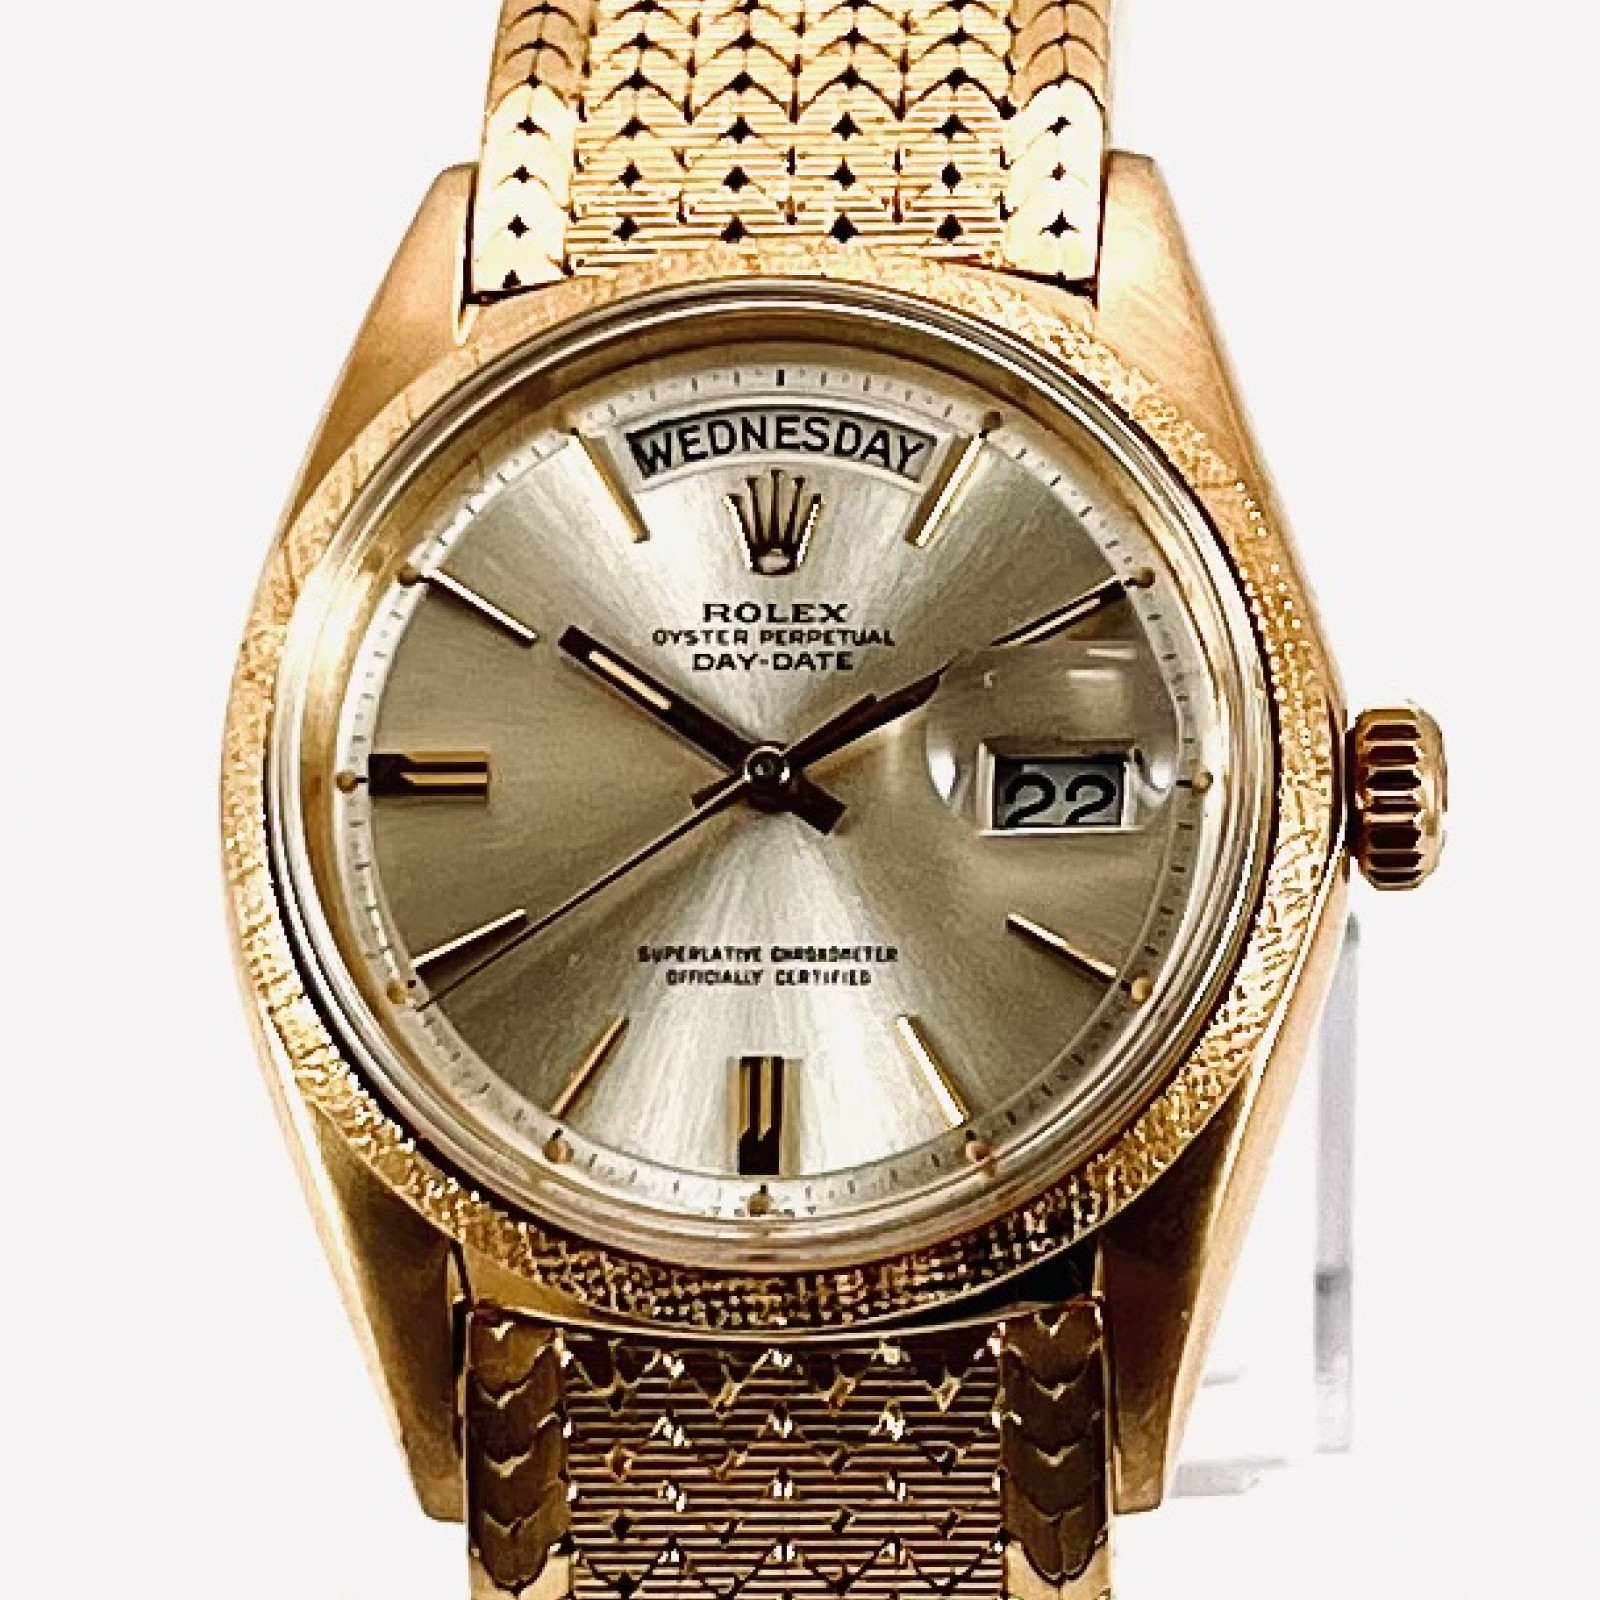 Buy, Trade Sell Pre-Owned Rolex | Ermitage Jewelers